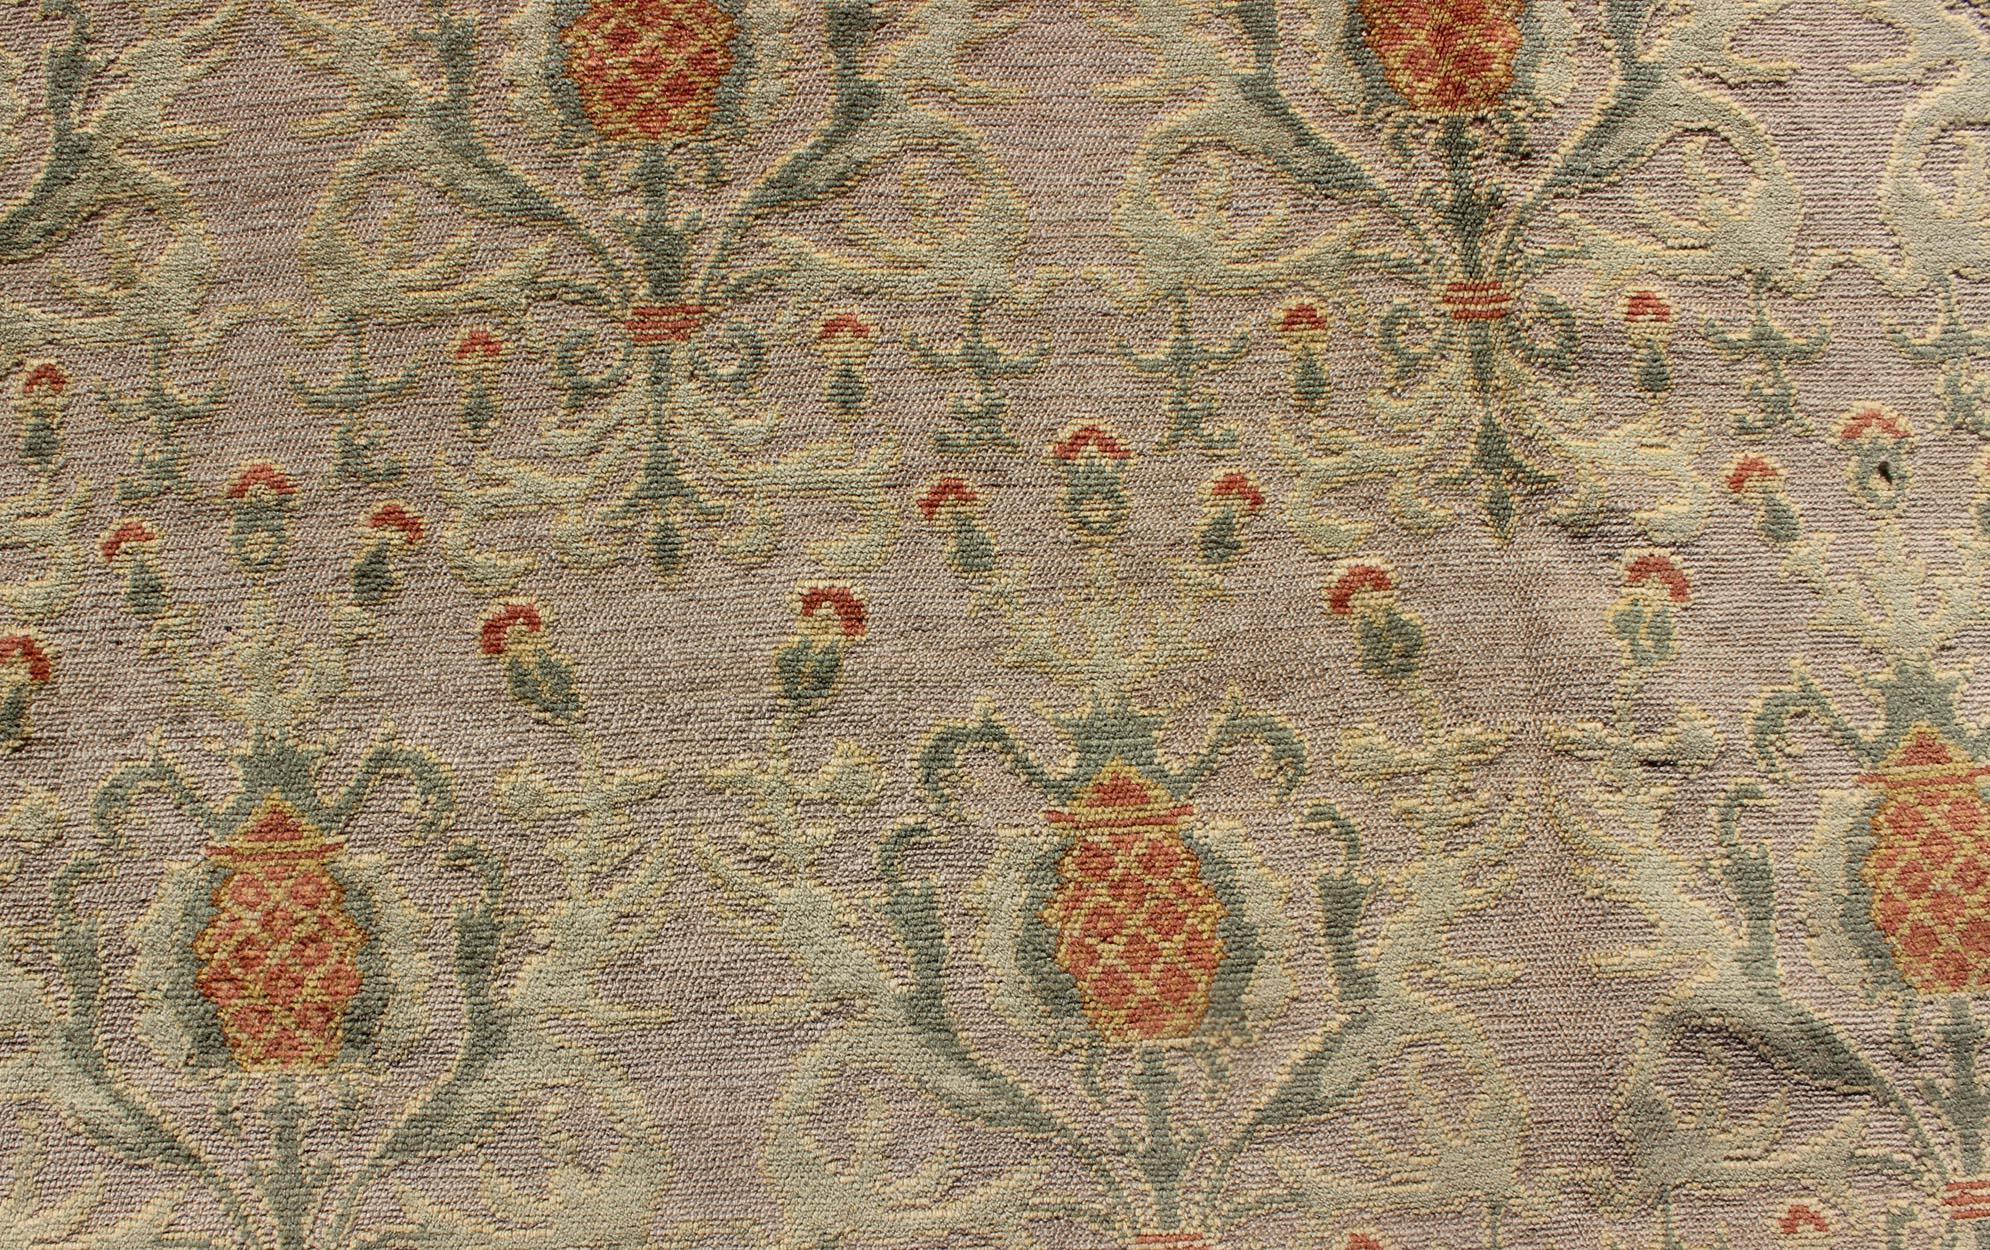 Square Sized Antique Spanish Carpet in Green, Orange and Gray/Blue 2